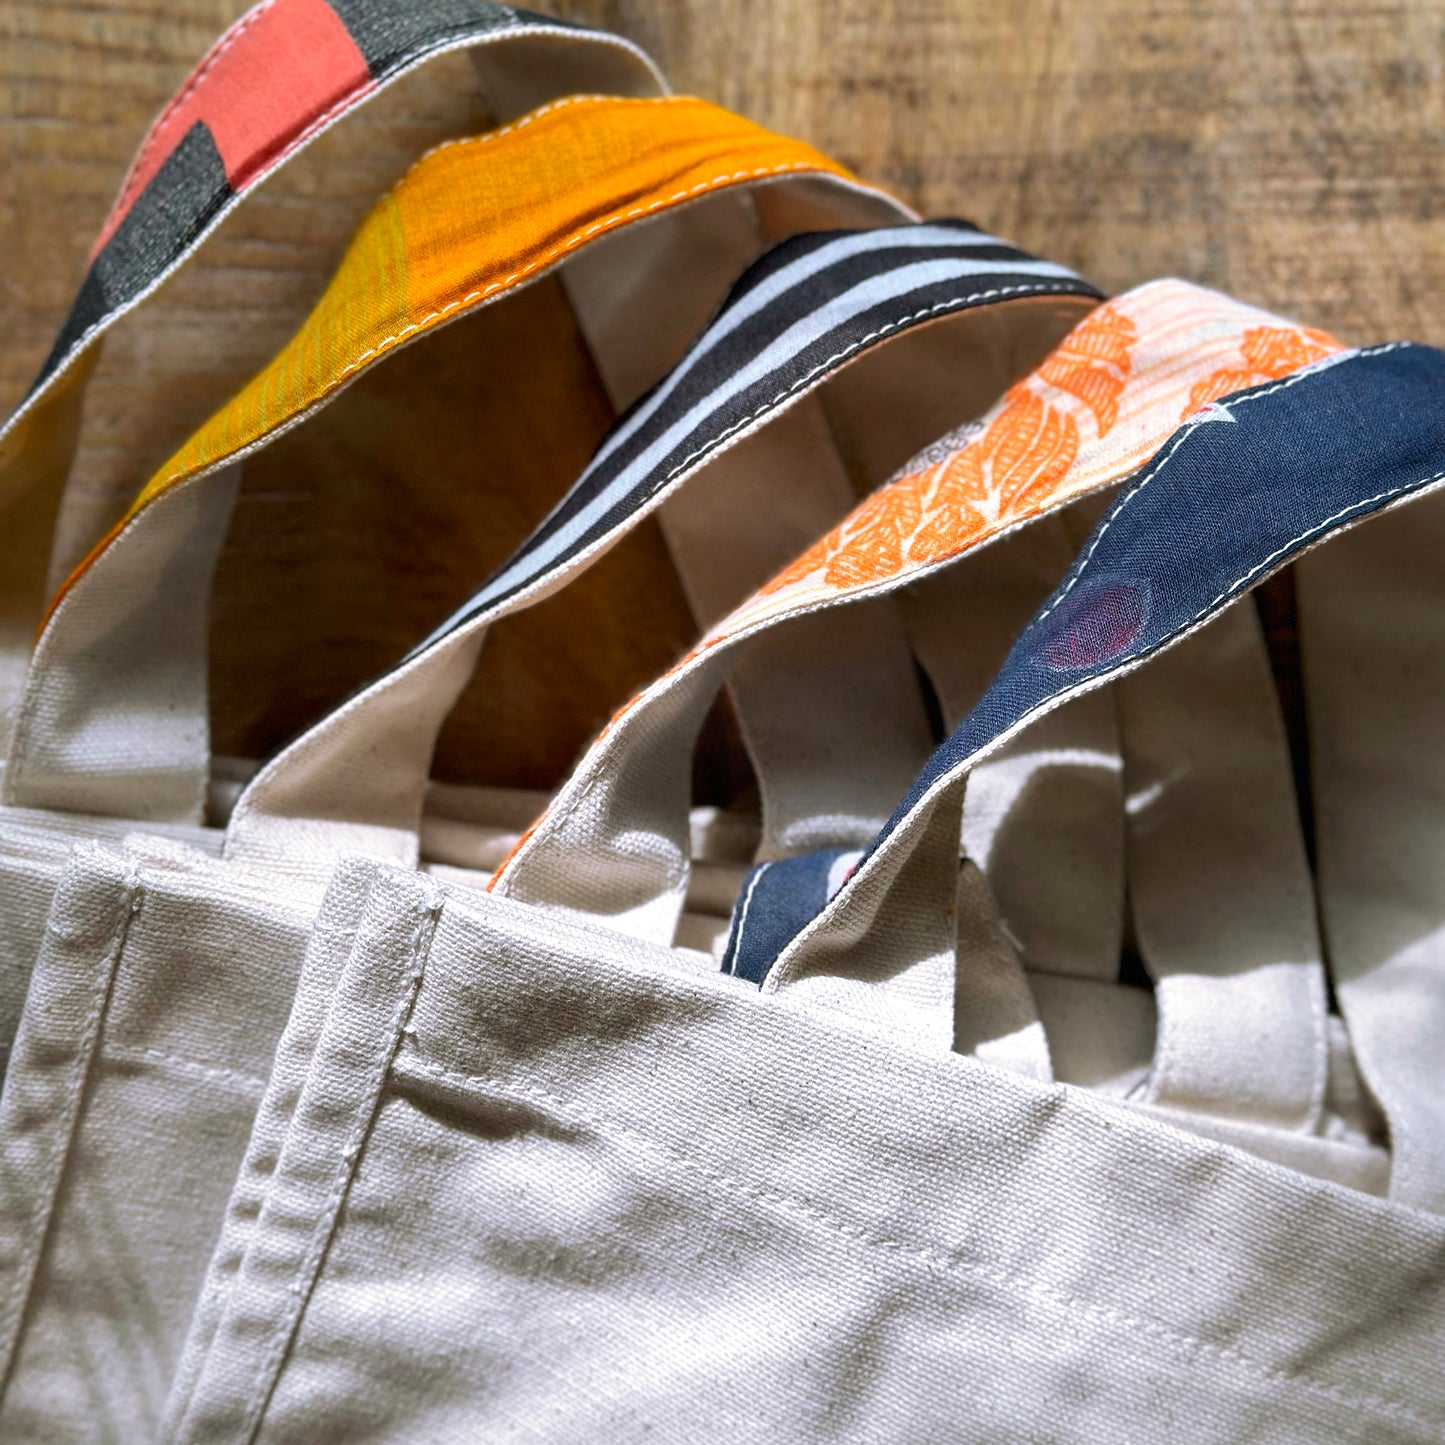 Several Parker bags lie in a row showing a range of colors from the upcycled sari handle linings.